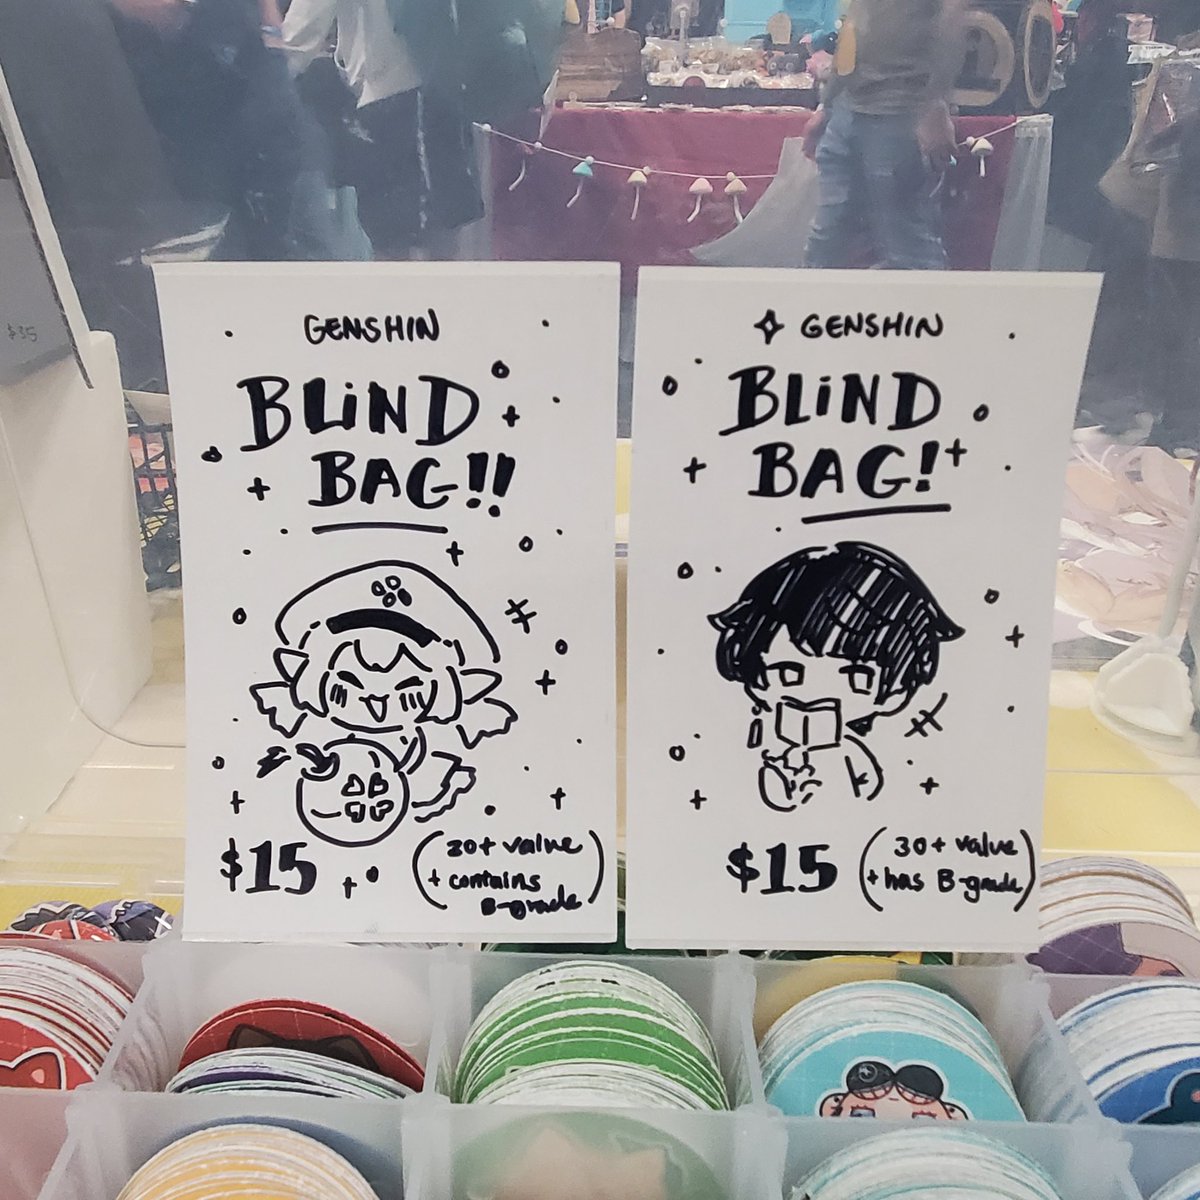 some blind bags i made hehe ♡ just made the last 3 of the day, come get 'em!!